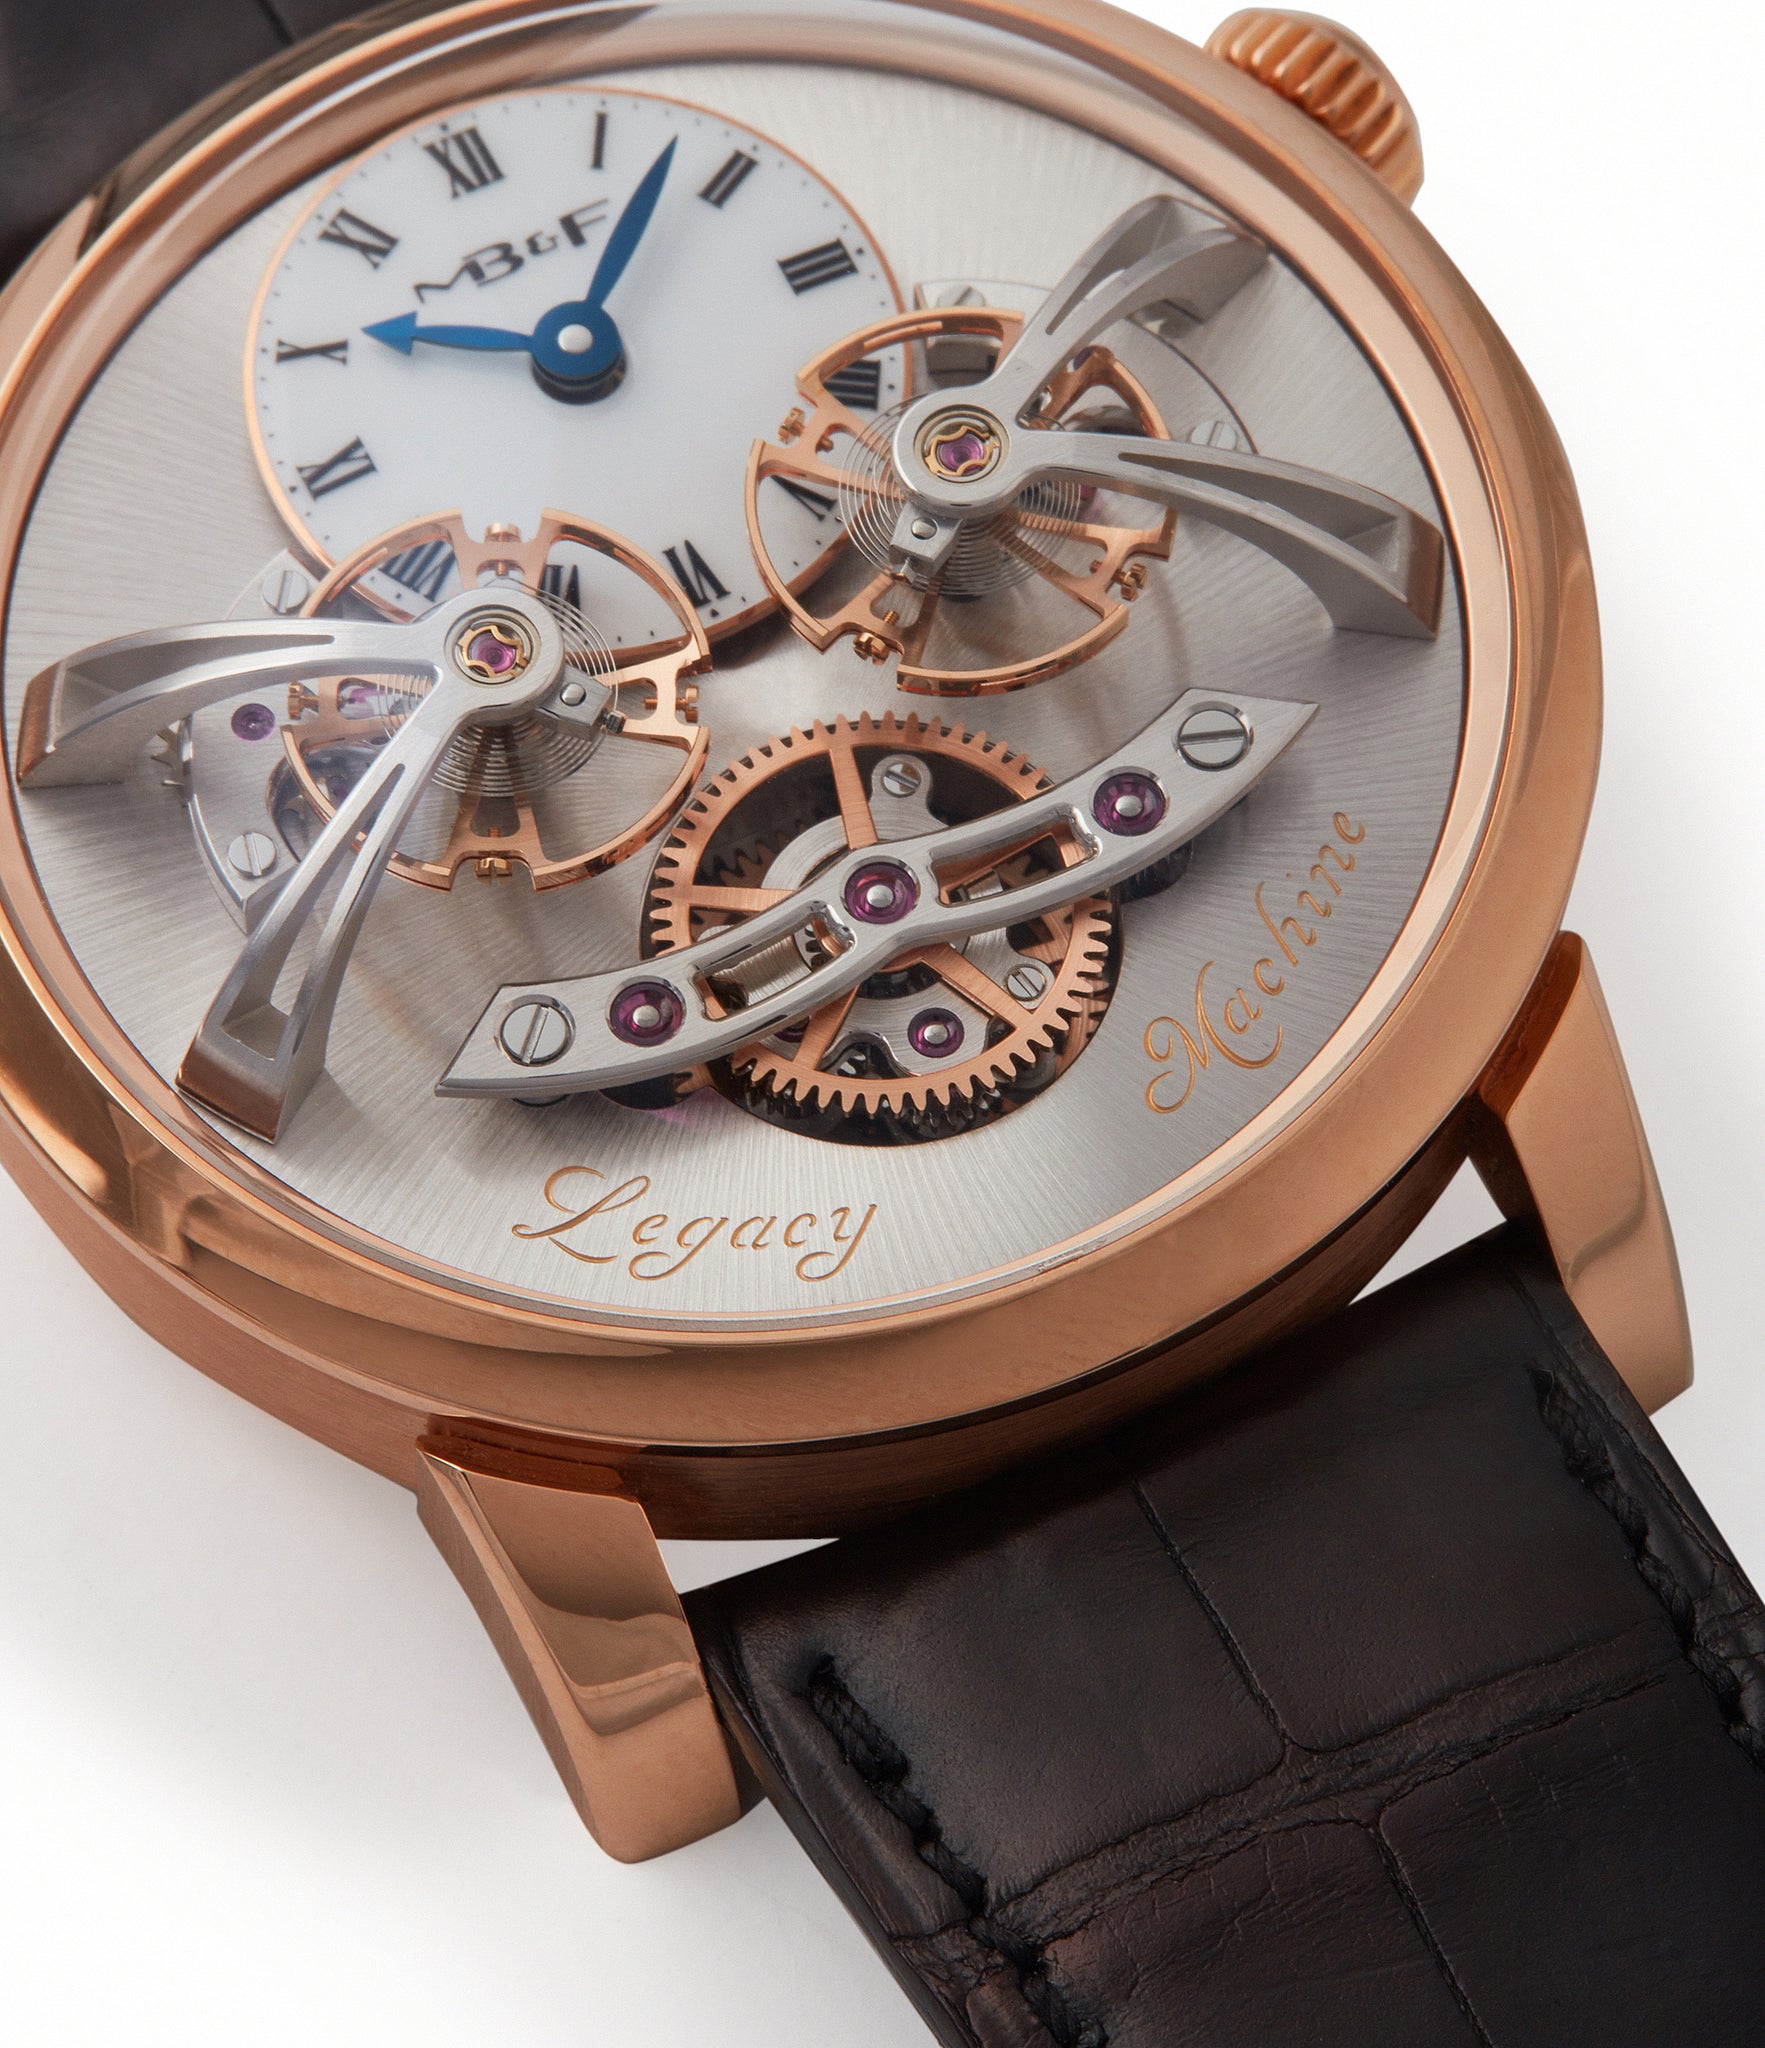 double flying balance MB&F Legacy Machine LM2 rose gold watch by independent watchmaker Max Busser Kari Voutilainen Mojon for sale at A Collected Man London UK specialist rare watches